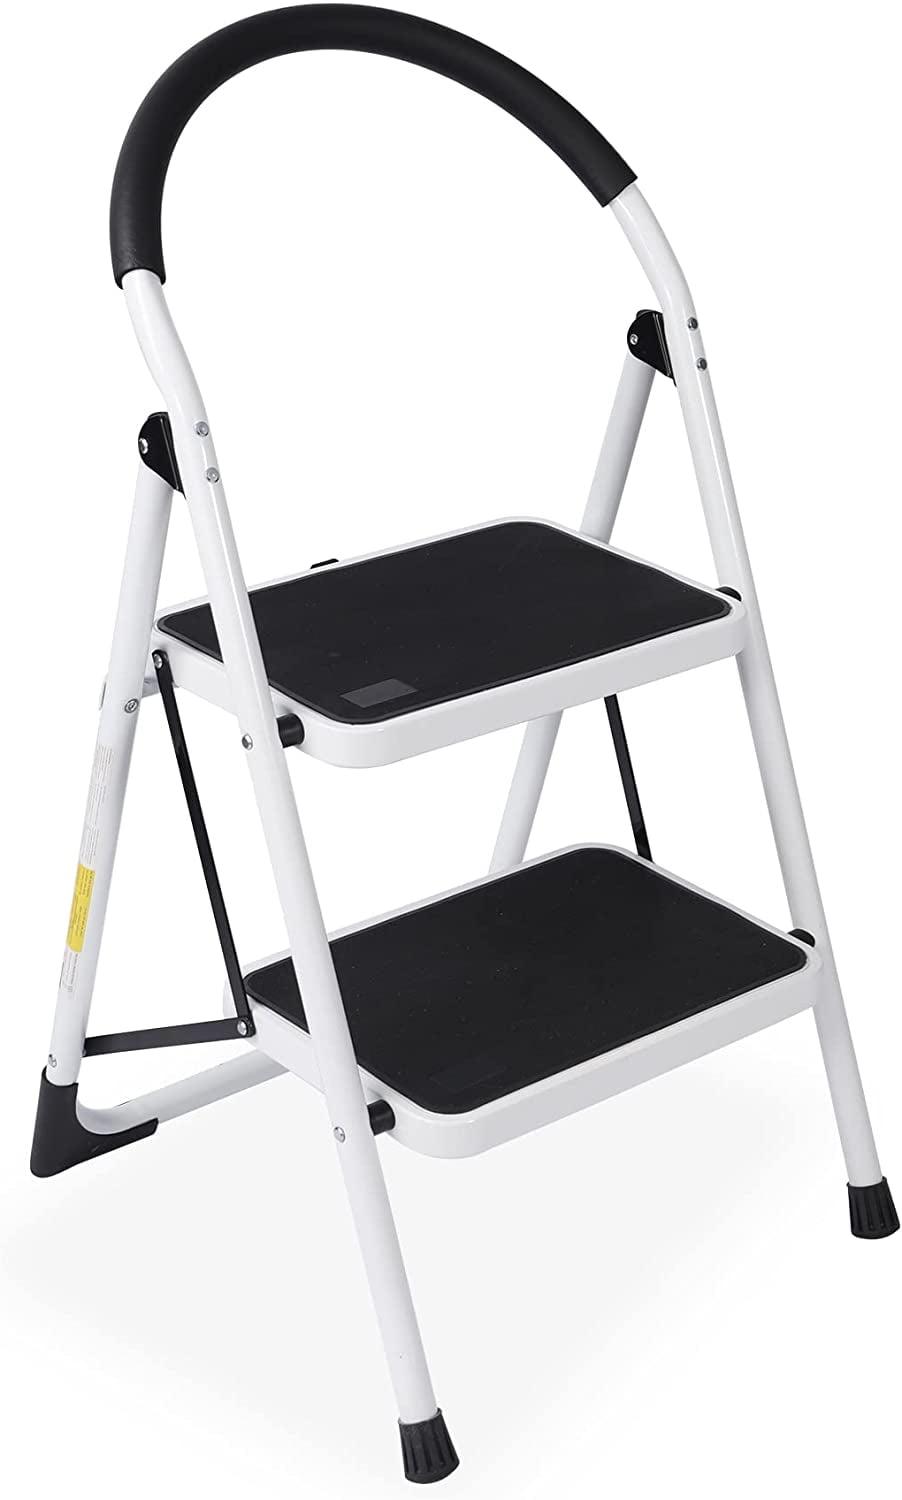 ONE STEP KITCHEN STRONG STOOL LADDER ANTI SLIP RUBBER MAT METAL LEGS SAFE STAND 